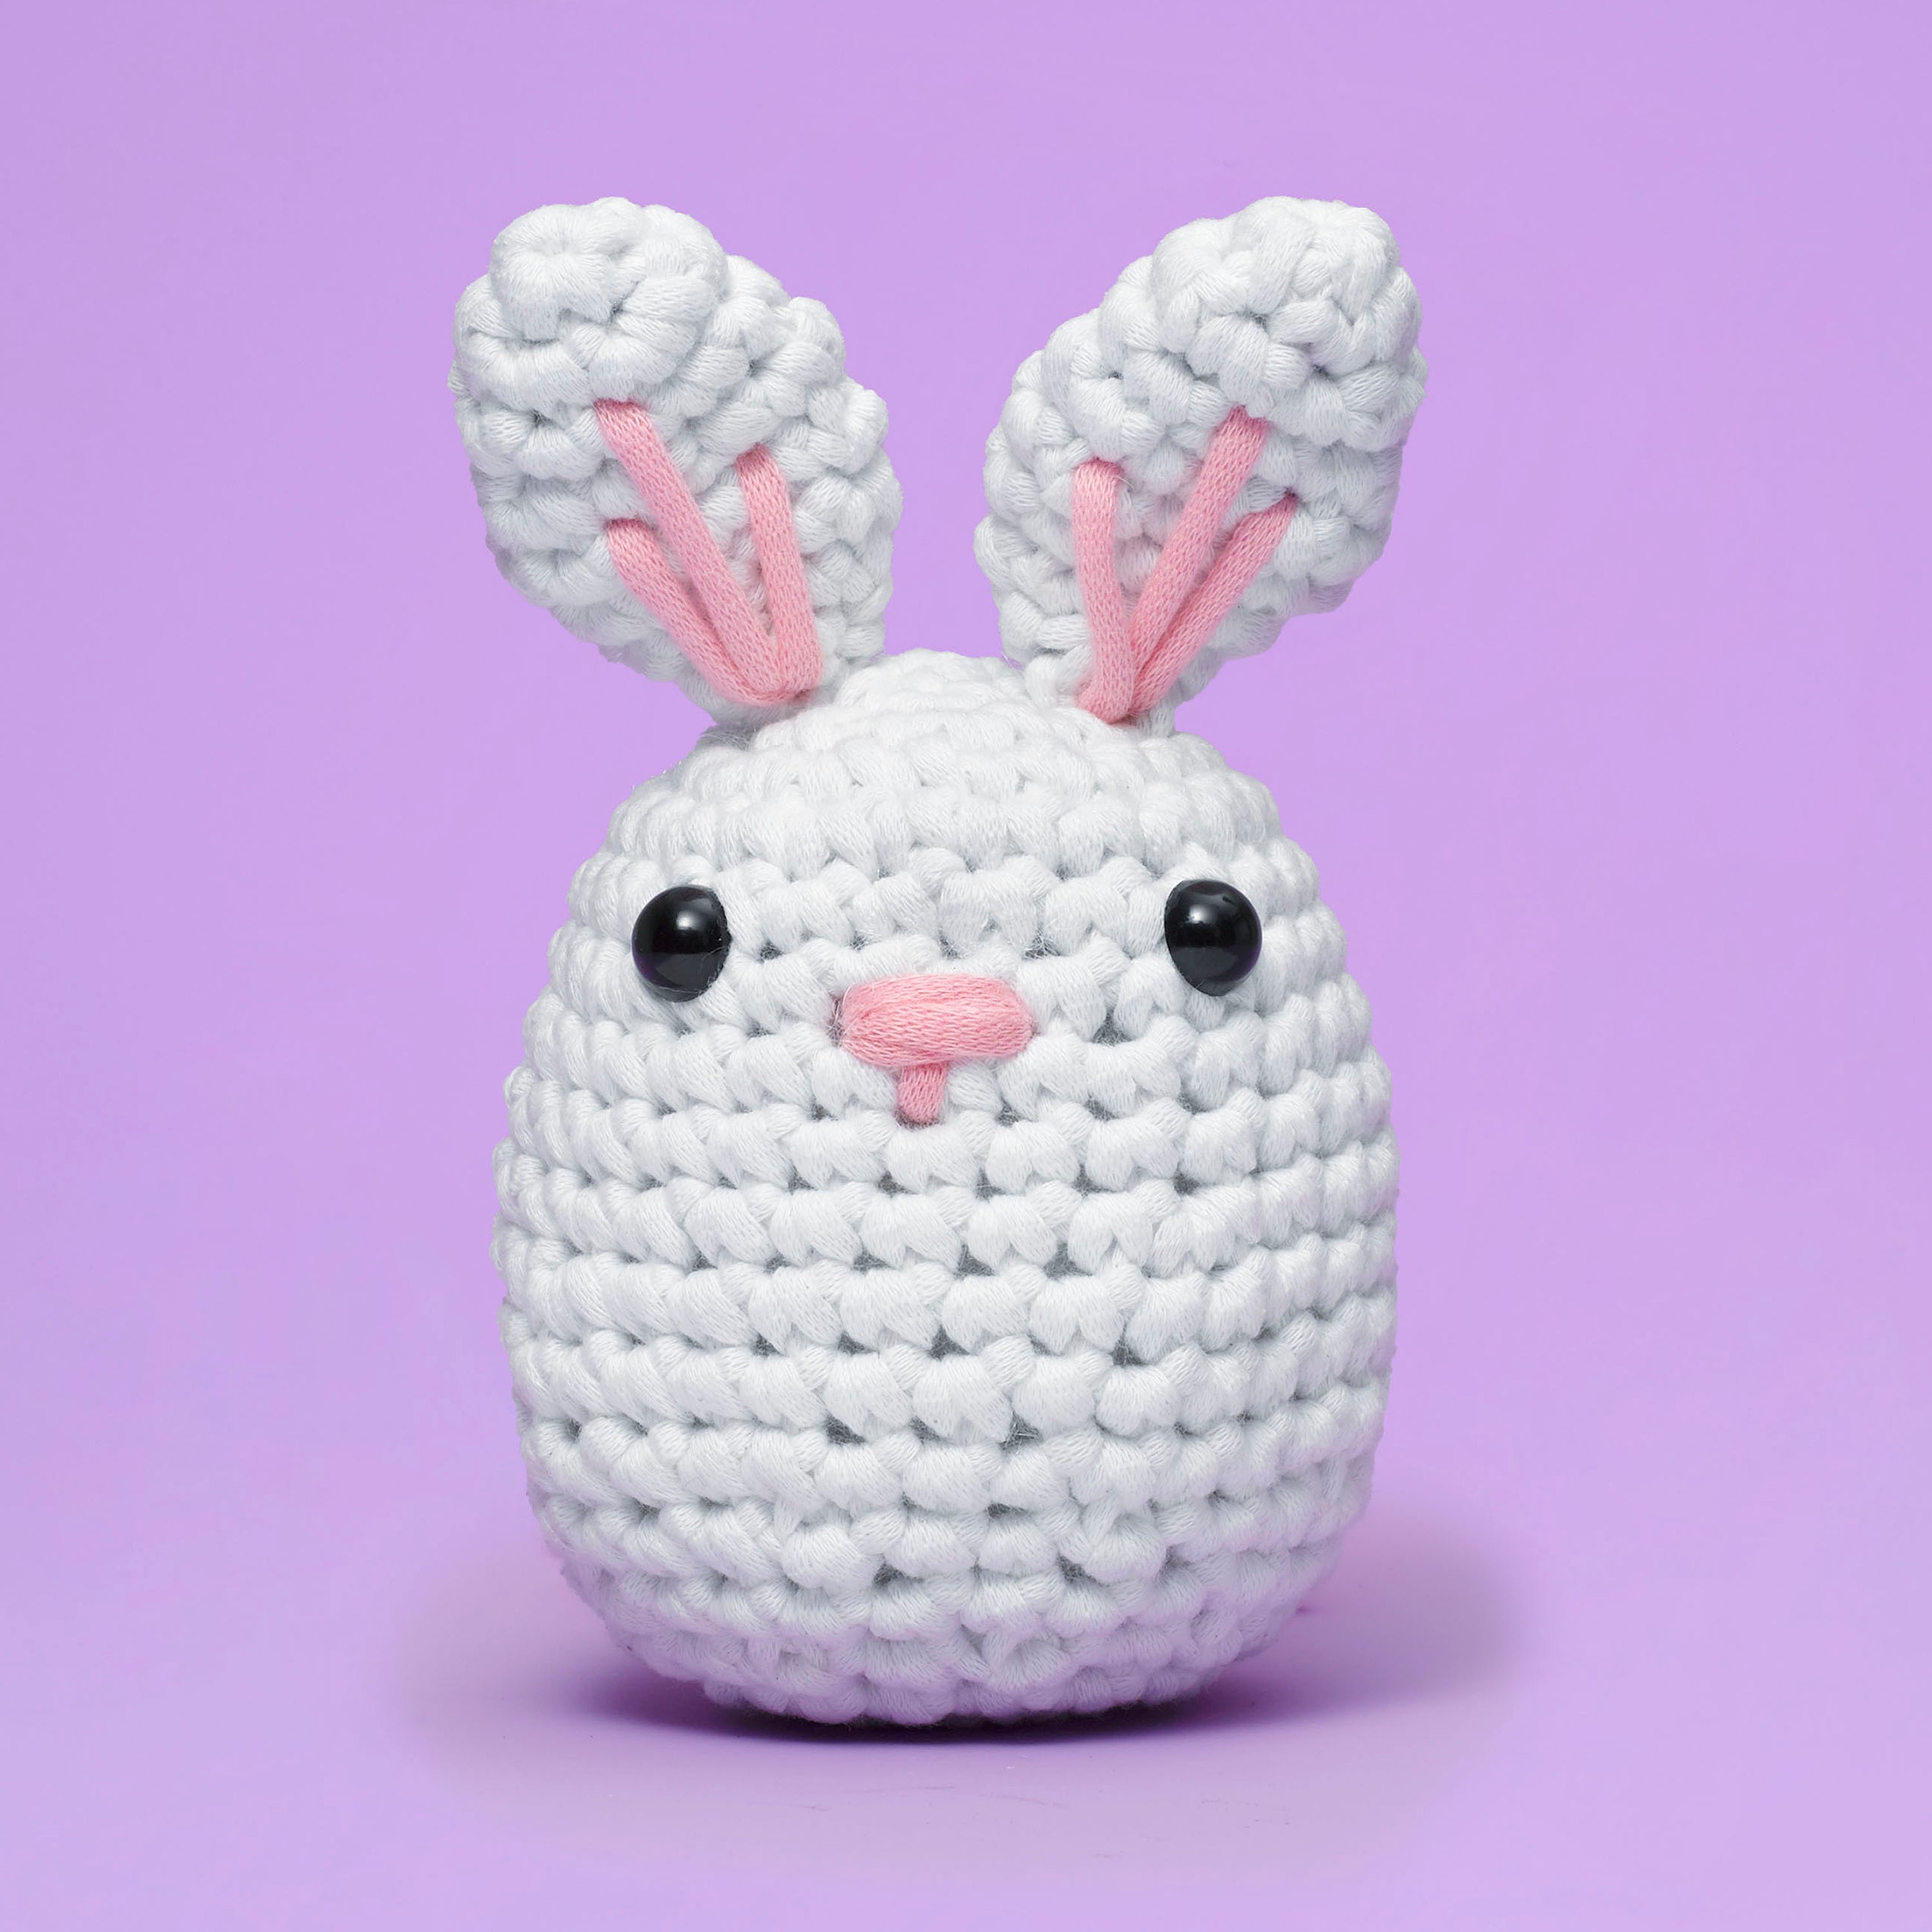 350 The Woobles: Learn Amigurumi for Beginners ideas